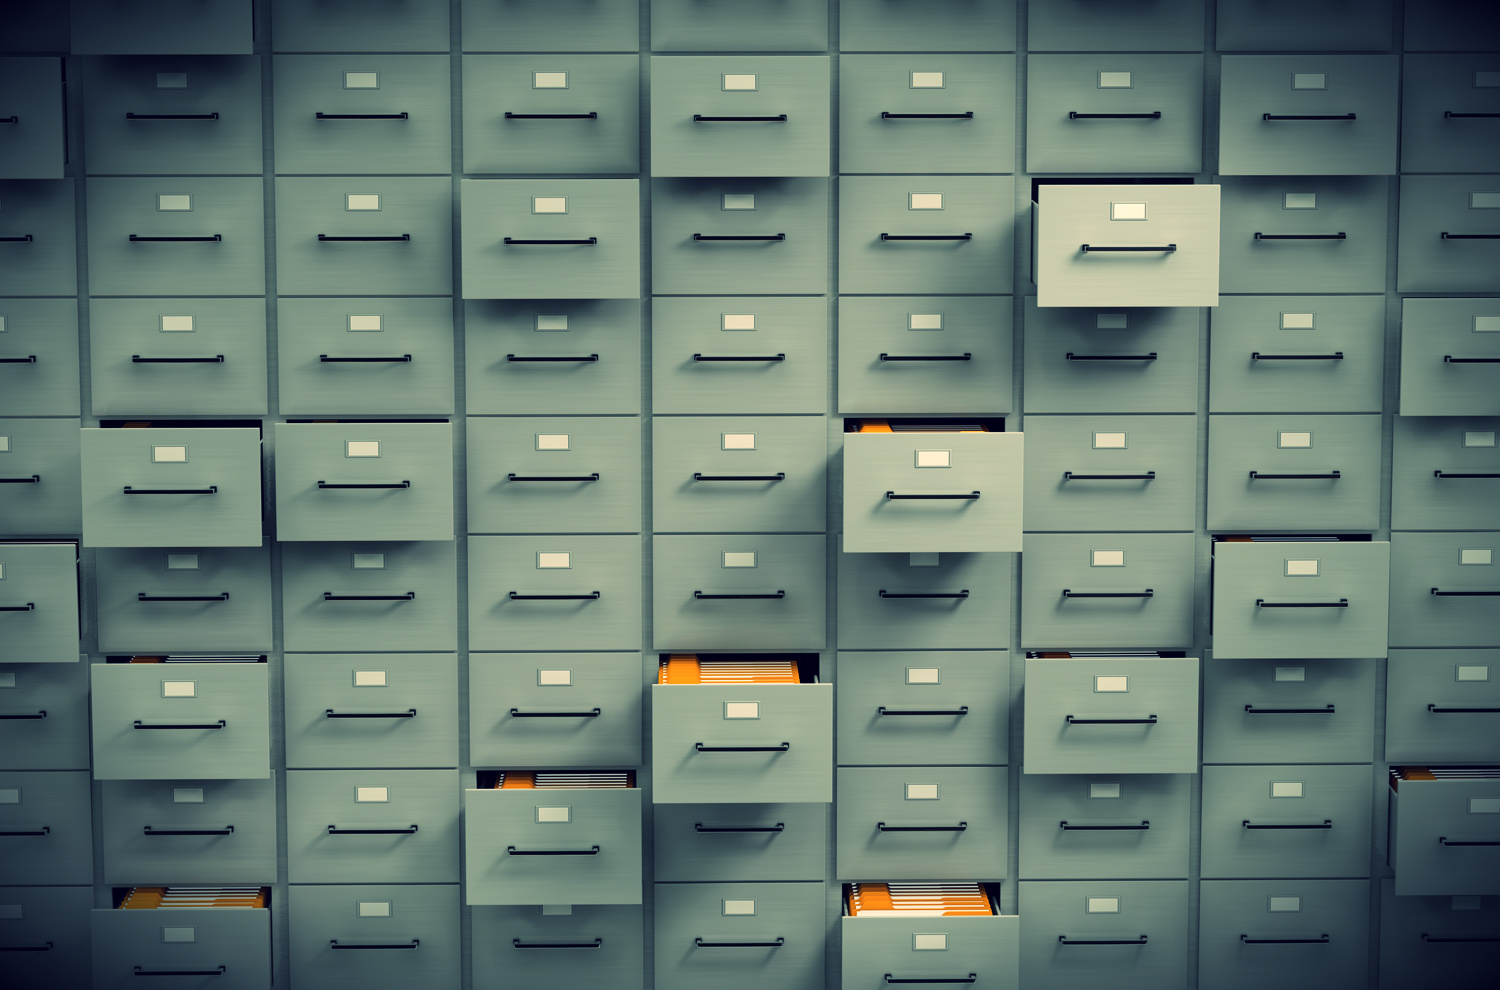 Image containing file cabinets to represent datasets. 